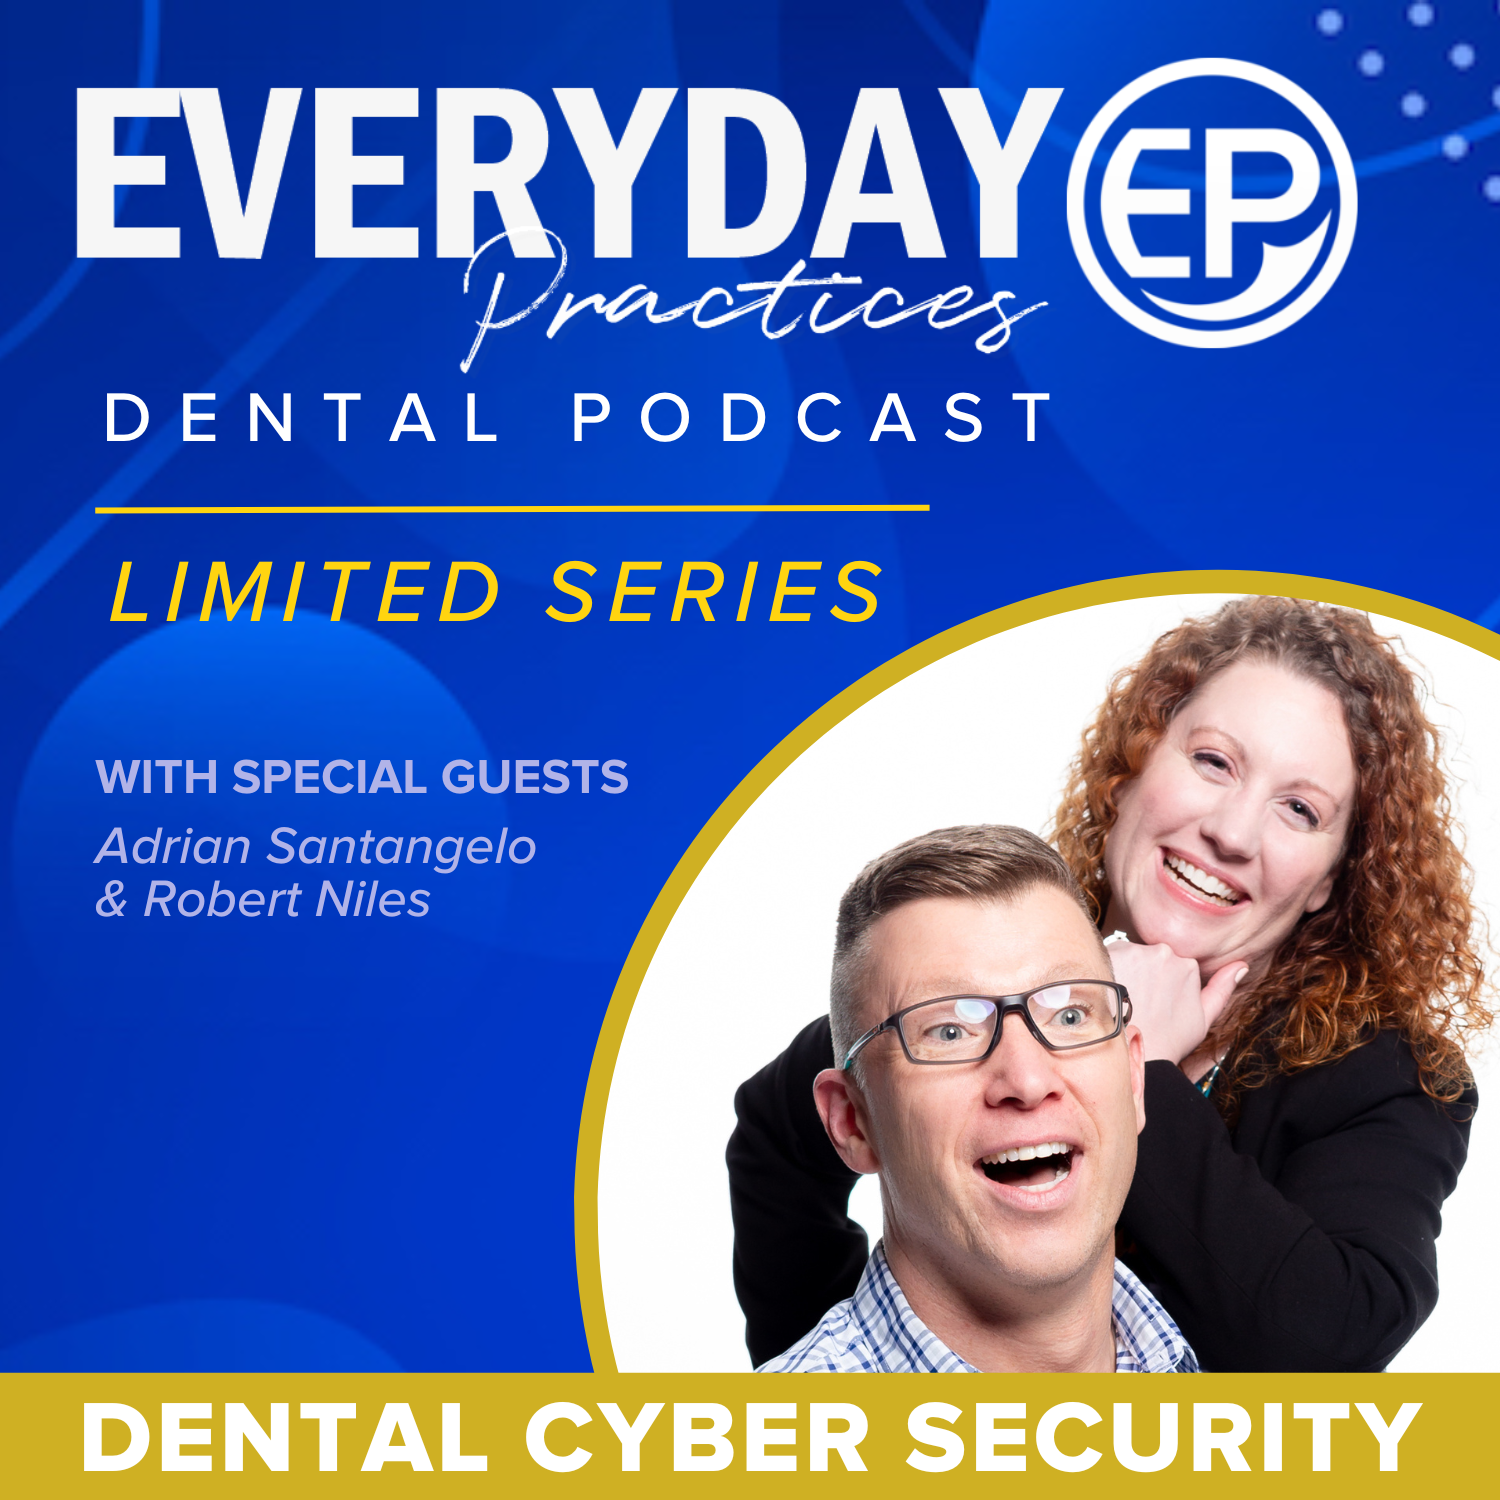 Everyday Practices Dental Podcast (Limited Series) with Special Guests Adrian Santangelo and Robert Niles